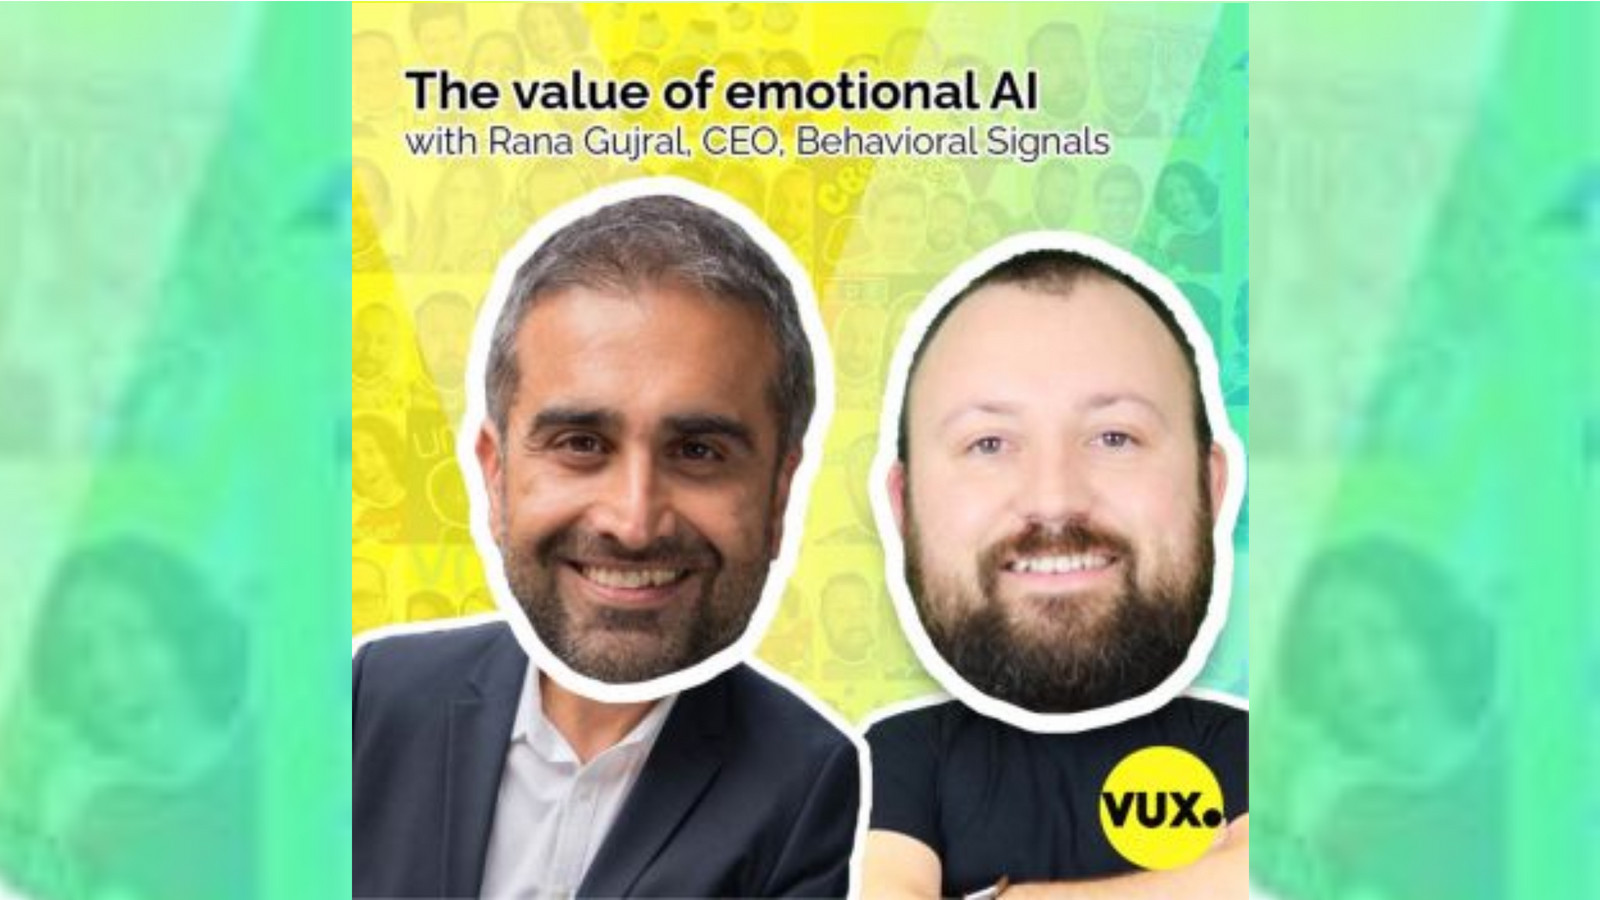 The-value-of- emotional-AI-with-Behavioral-Signals-CEO-Rana-Gujral